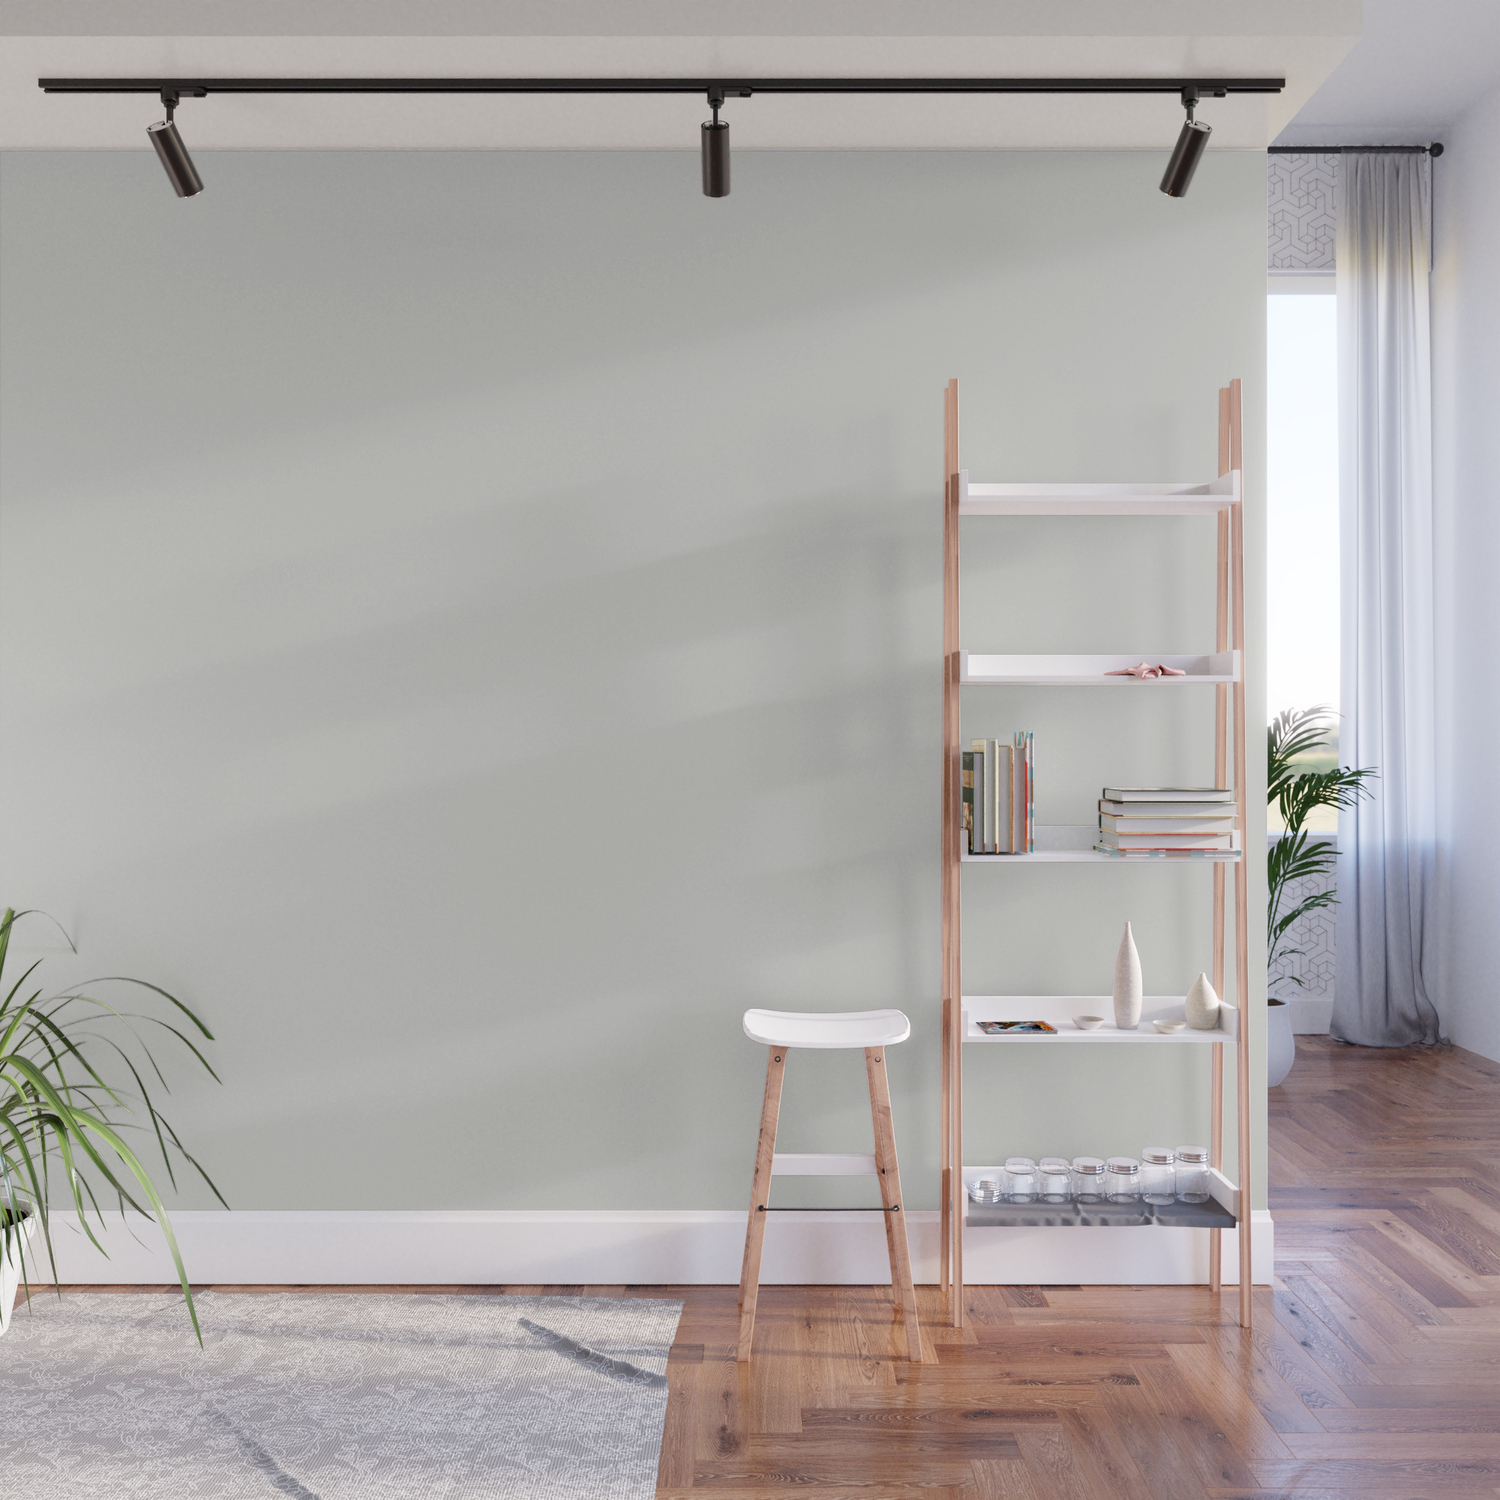 Parchment White Solid Color Pairs With Behr Paint S 2020 Forecast Trending Color Painter S White Wall Mural By Simplysolids Society6,How To Make Crepes Batter